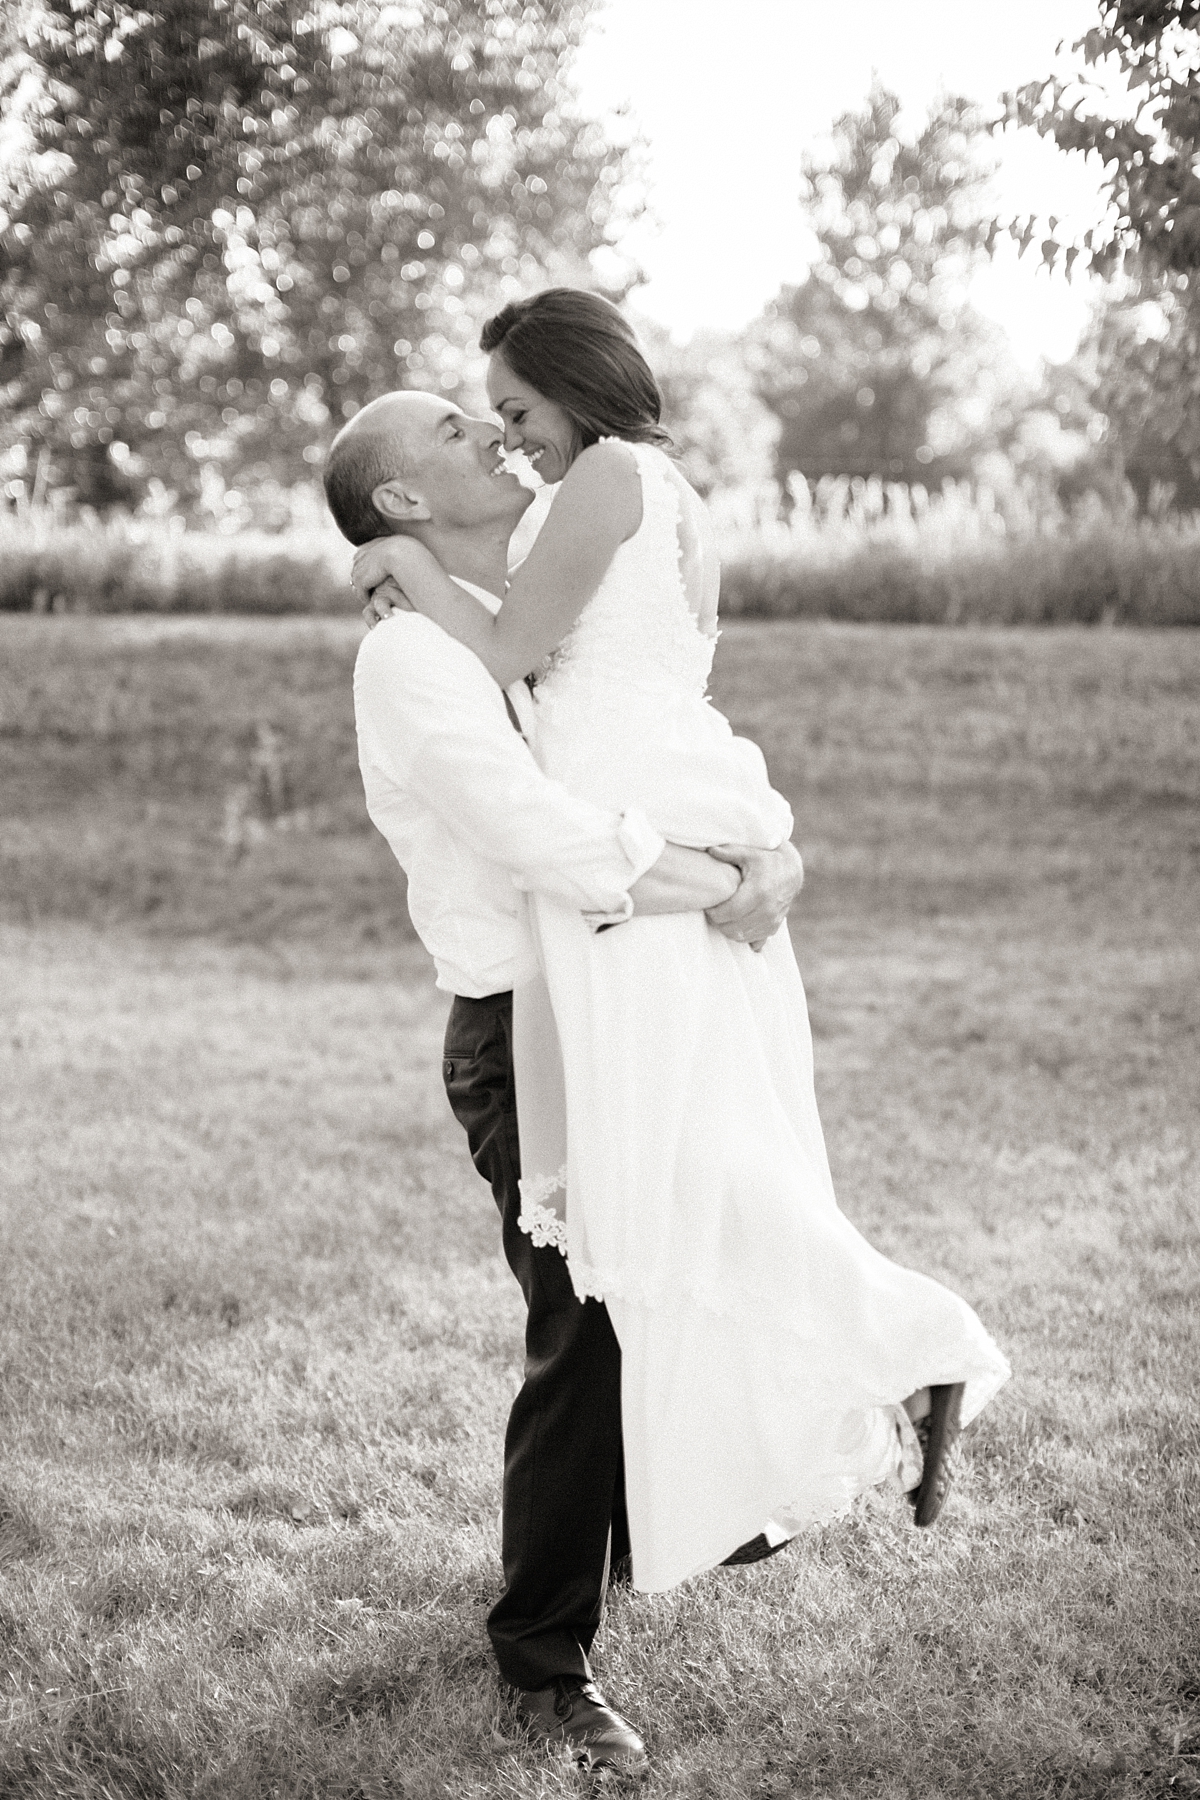 authentic meaningful wedding photography by golden veil photography north dakota midwest photographer